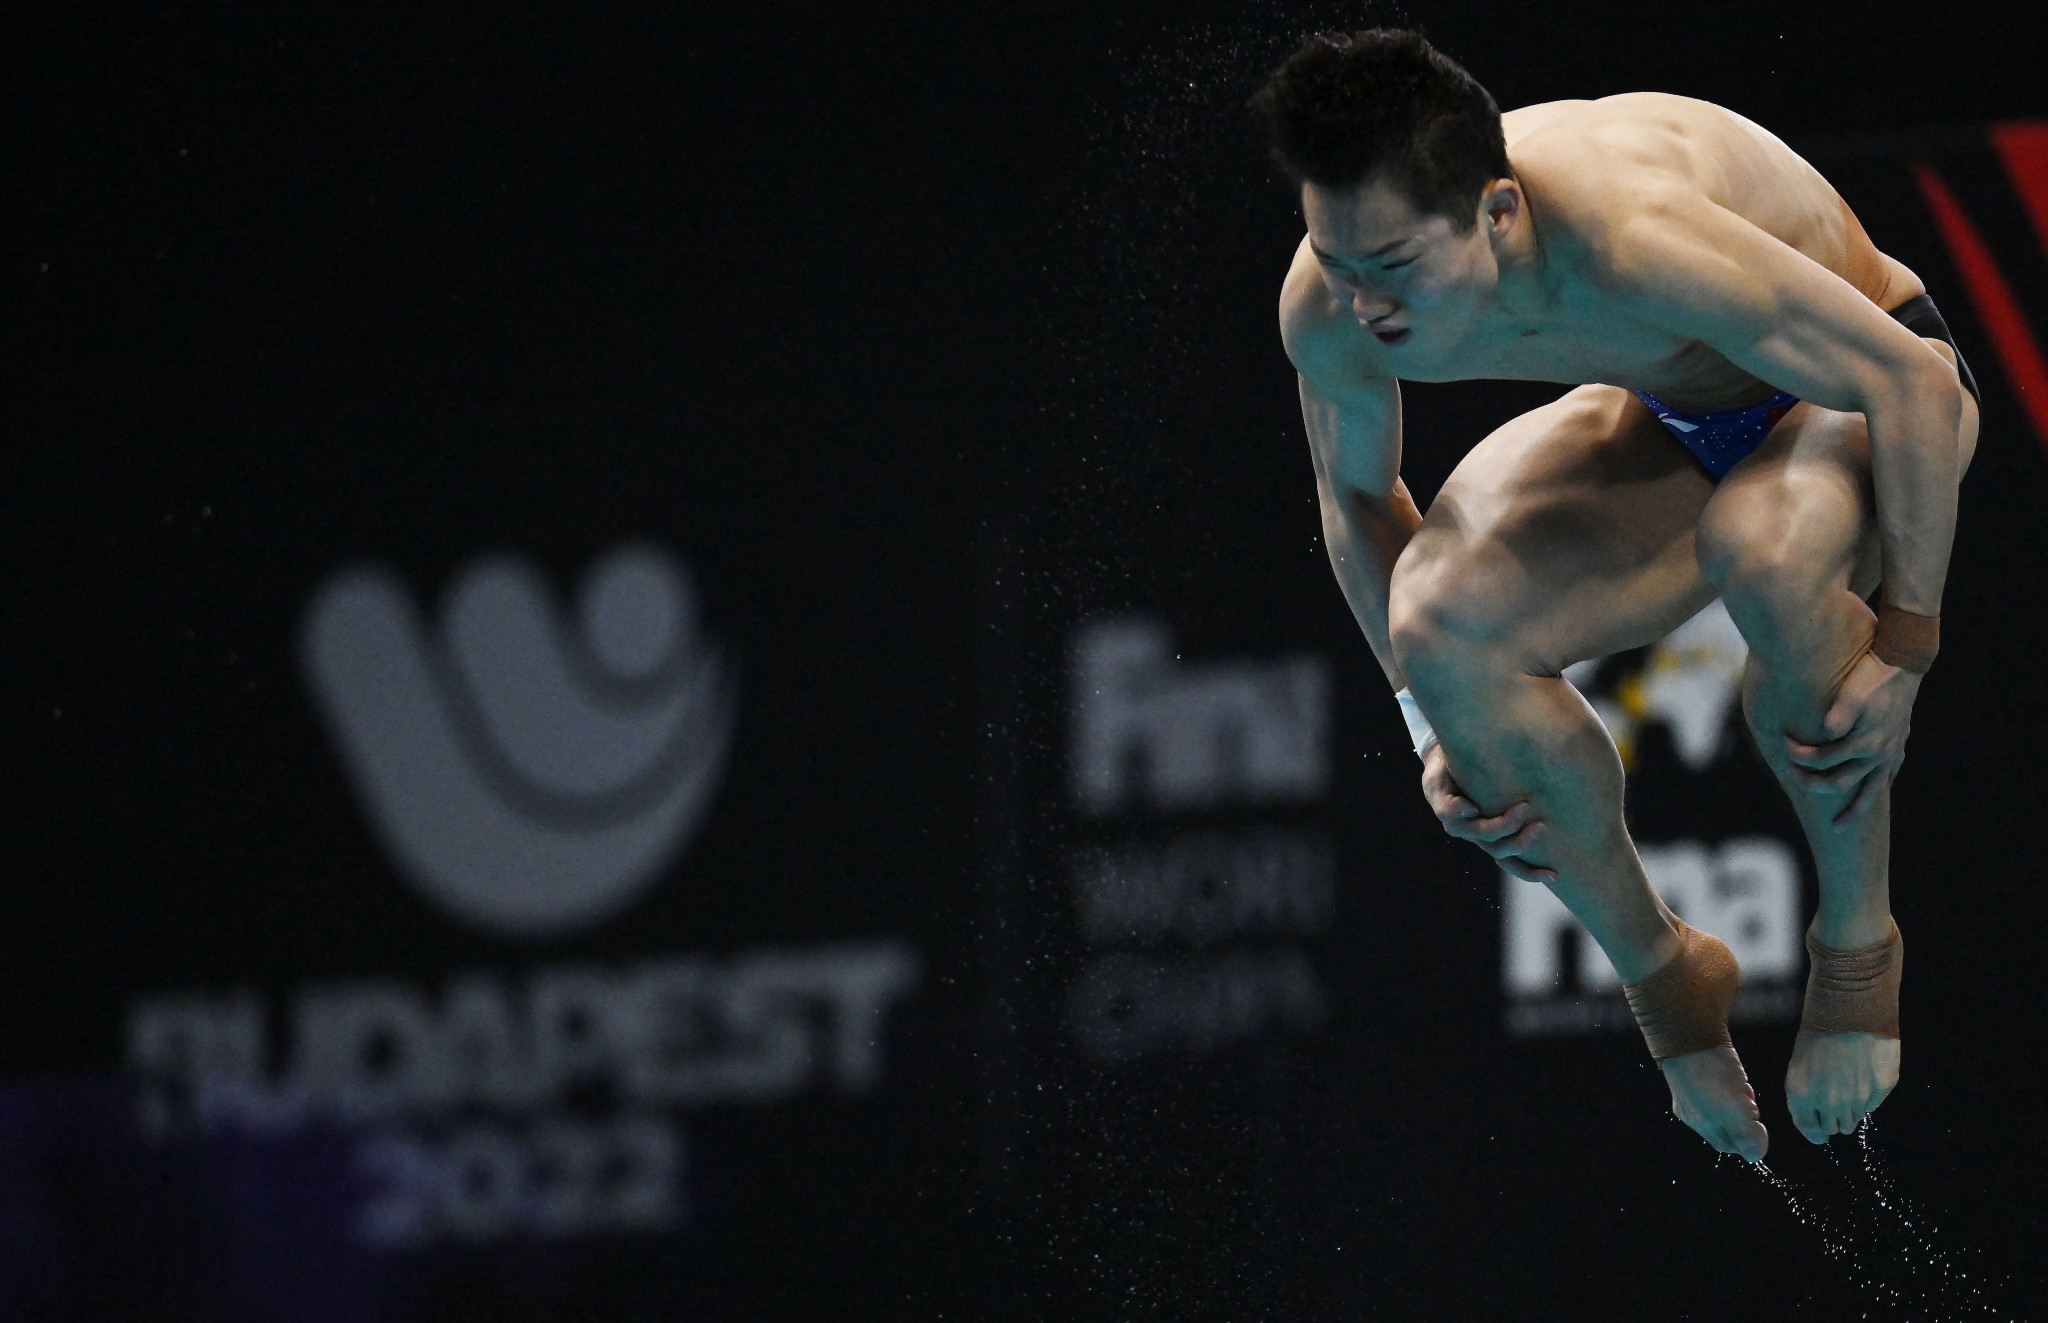 China's Wang Zongyuan triumphed by almost 70 points in the men's 3m springboard final ©Getty Images